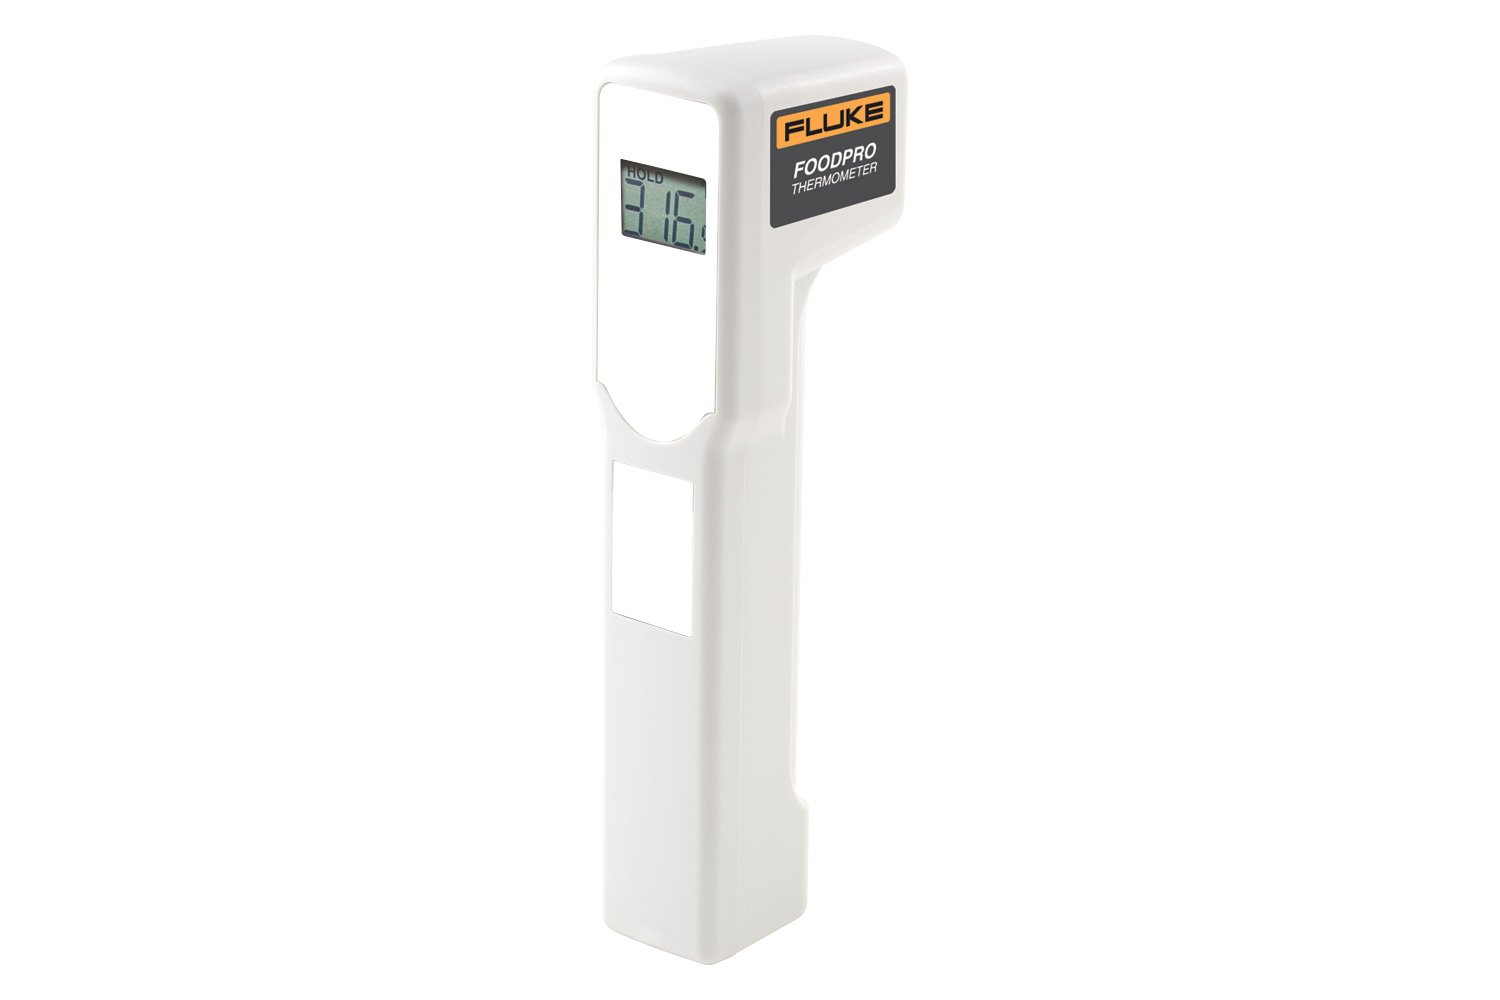 Food Inspector Infrared Thermometer